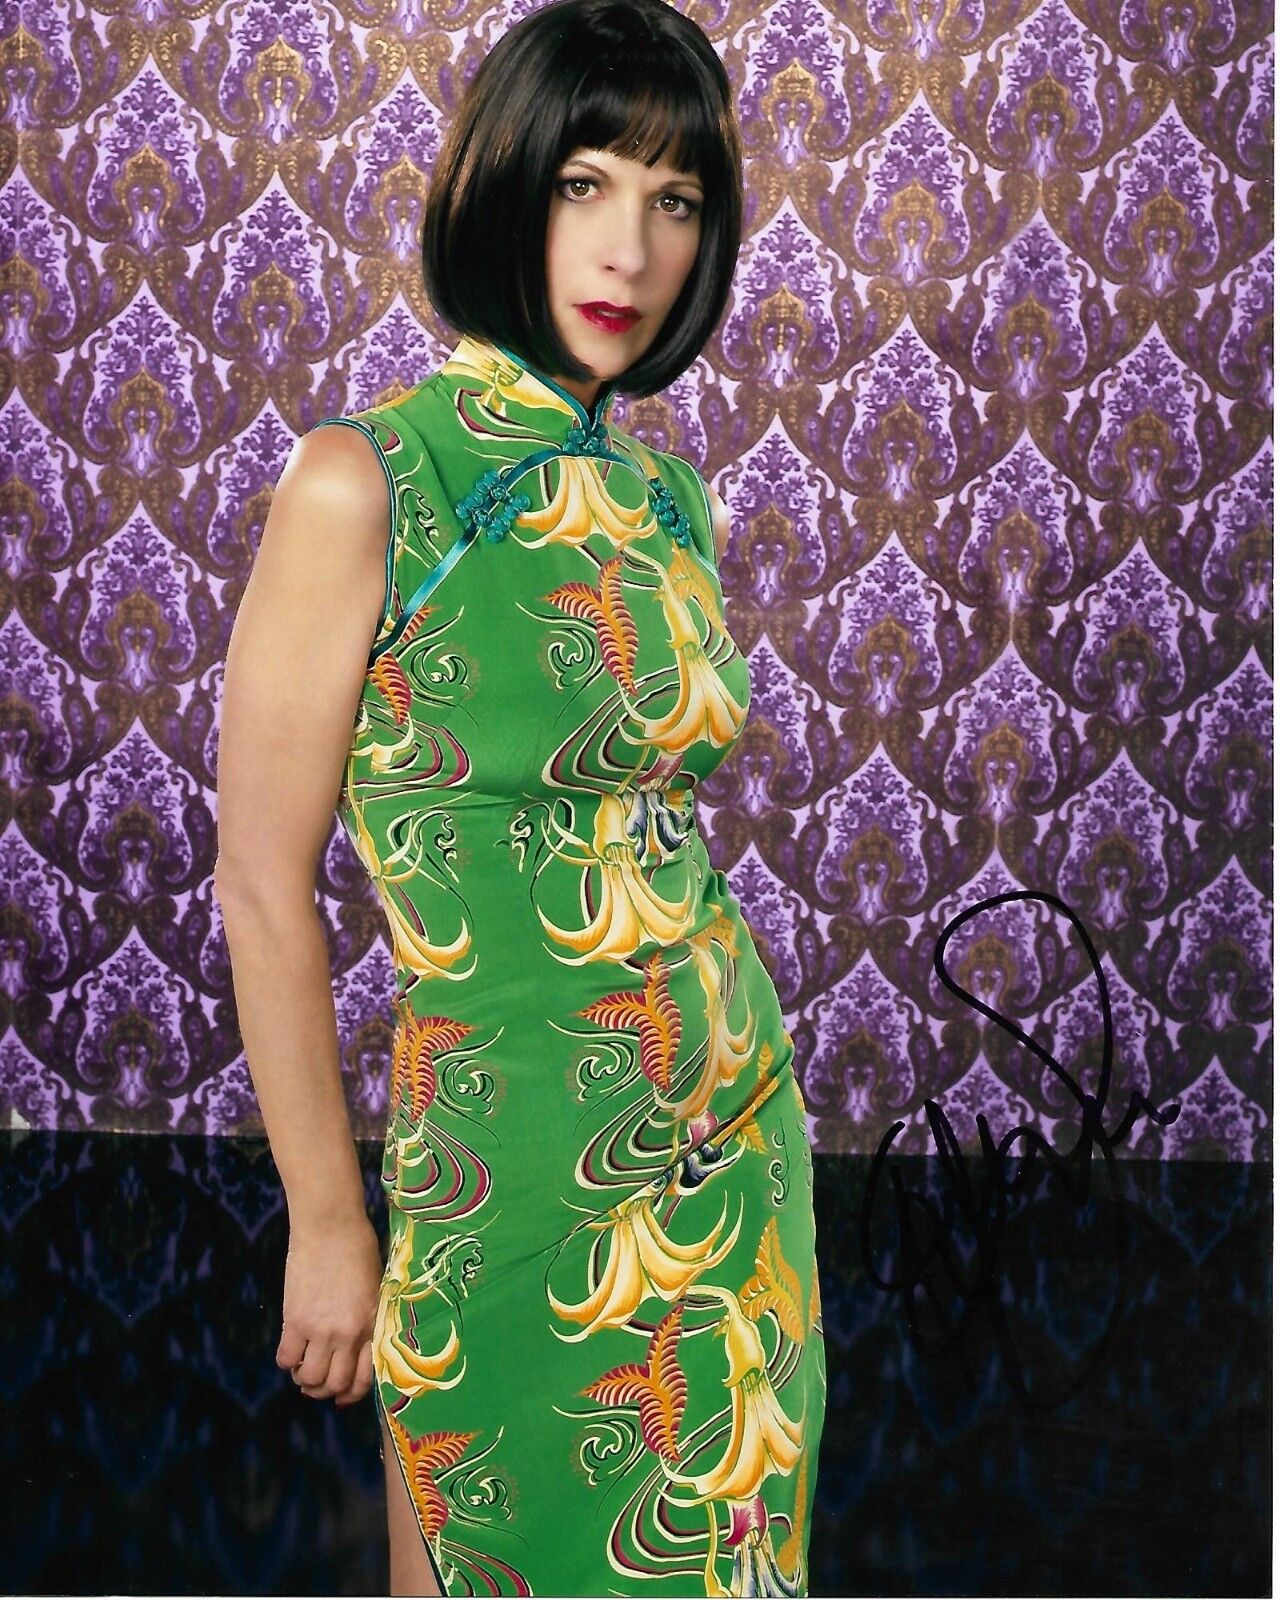 ELLEN GREENE PUSHING DAISIES AUTOGRAPHED Photo Poster painting SIGNED 8X10 #1 VIVIAN CHARLES